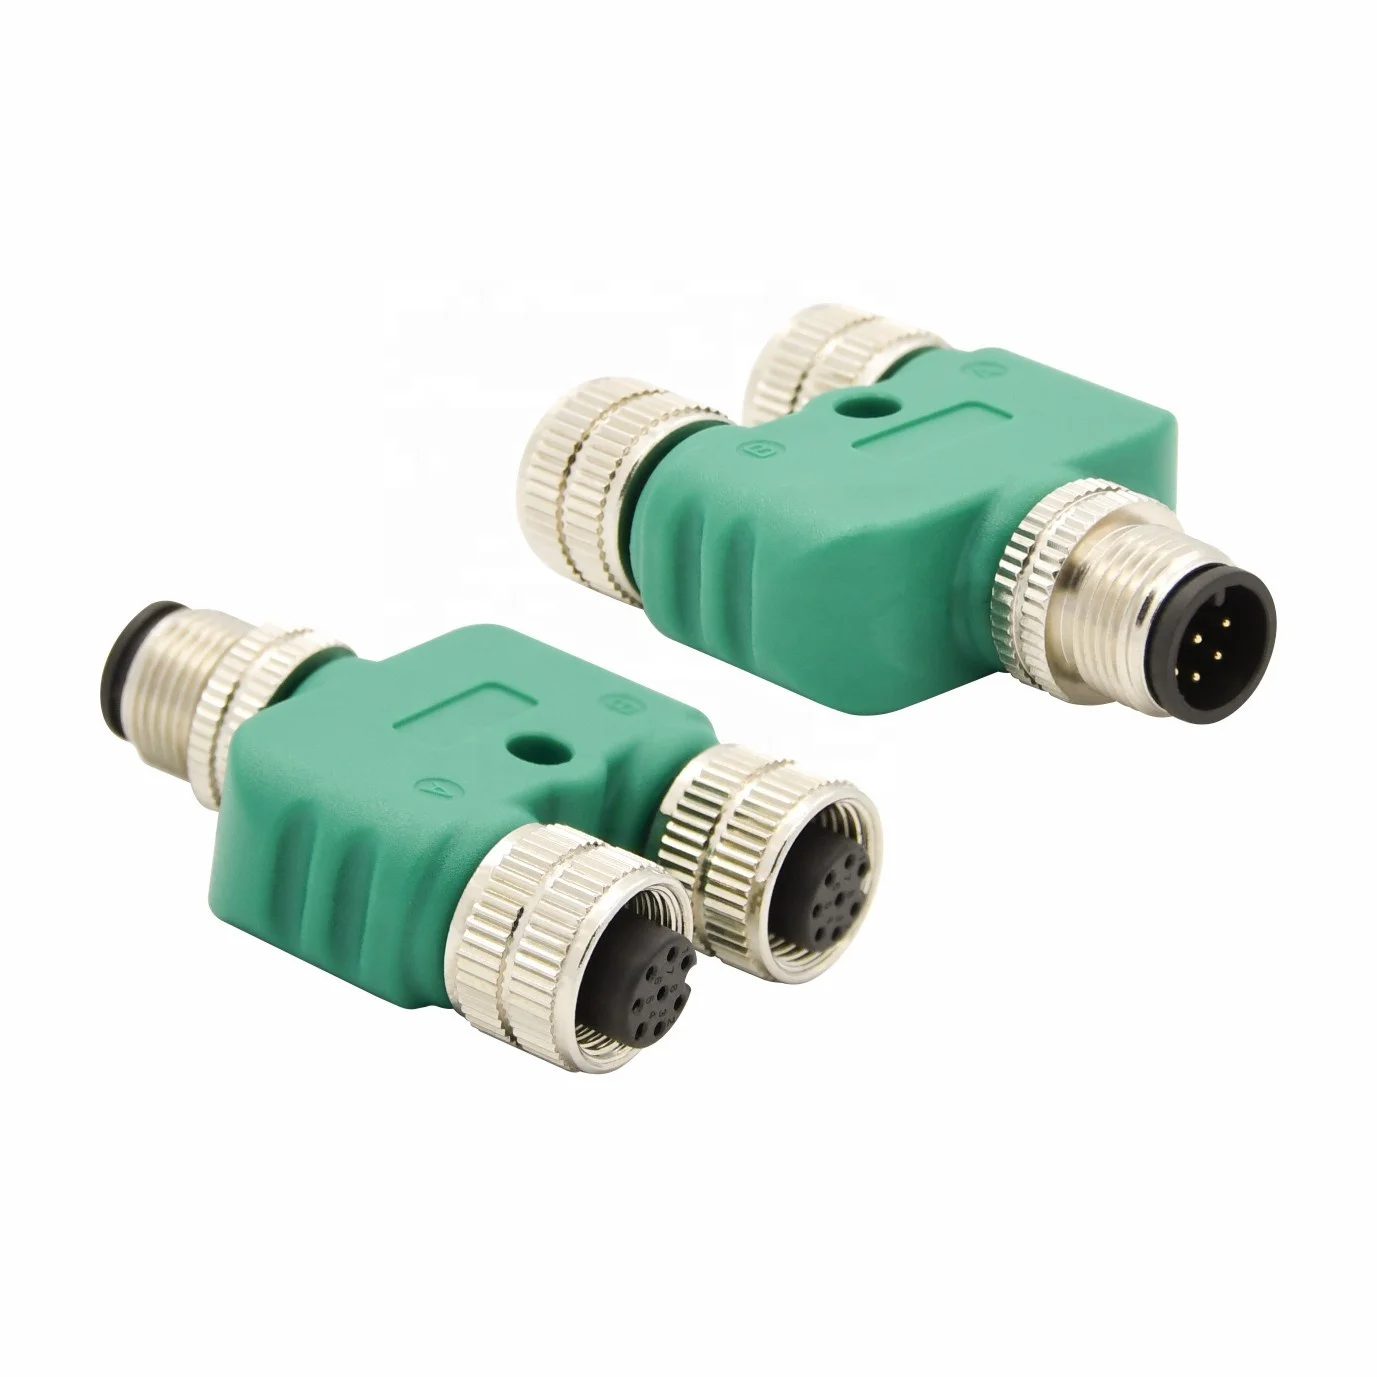 Customized m12 circular waterproof IP67 distributor female to male cable adapter Y-Splitter sensor M12 Y shape plug connector